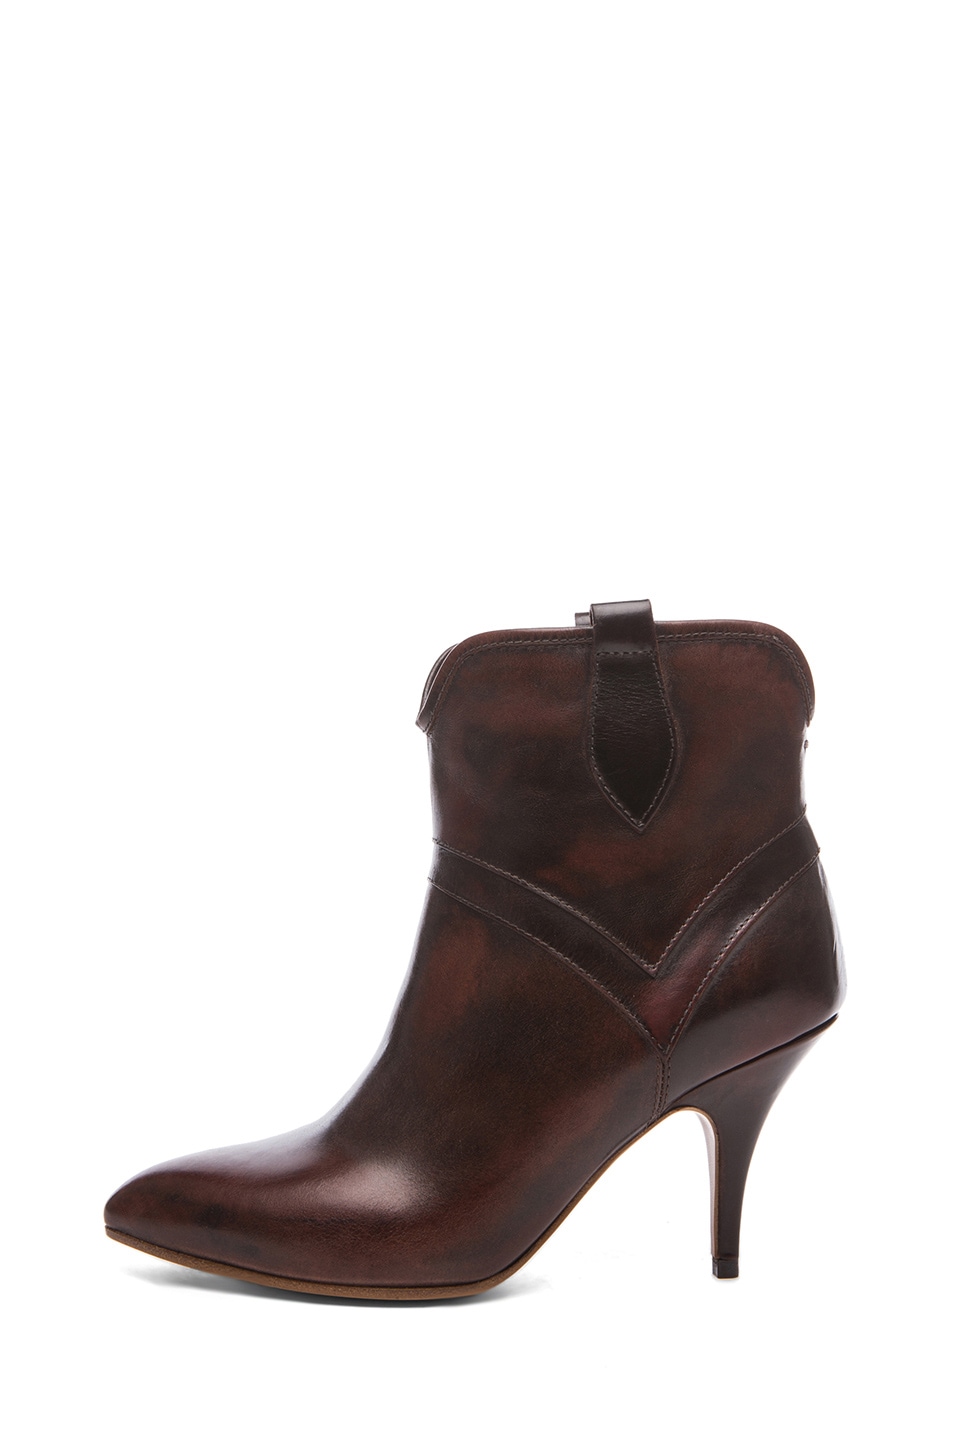 Image 1 of Maison Margiela Leather Texan Brushed Effect Bootie in Brandy